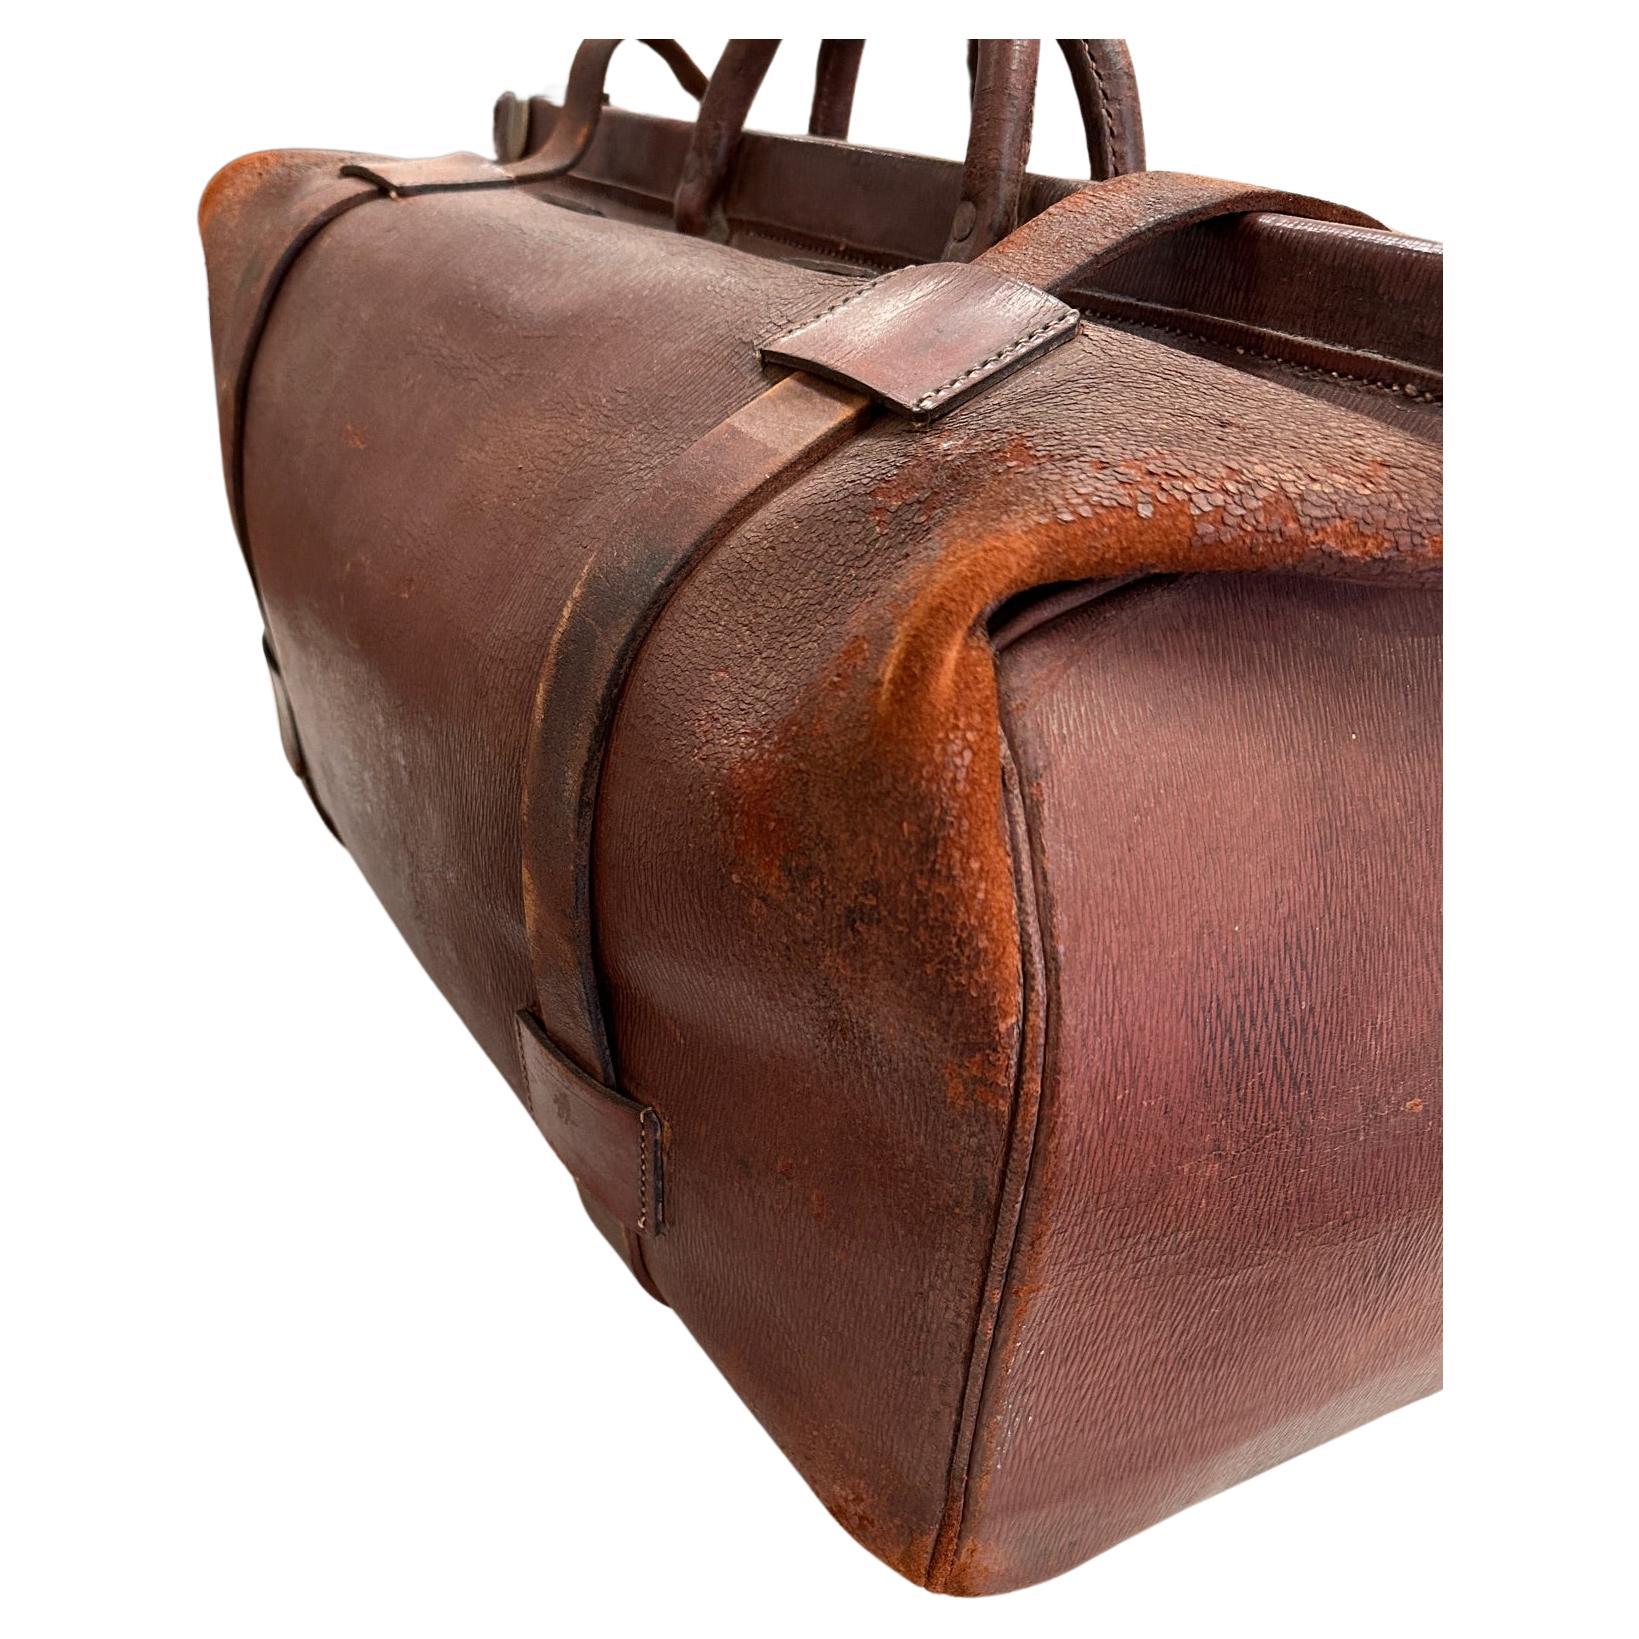 This beautiful 19th Century large scale Antique leather traveling bag or luggage is truly a special piece.  The bag opens and all of the brass hardware is in working condition. The bag is in the shape of a Dr's medicine bag but much larger - like a